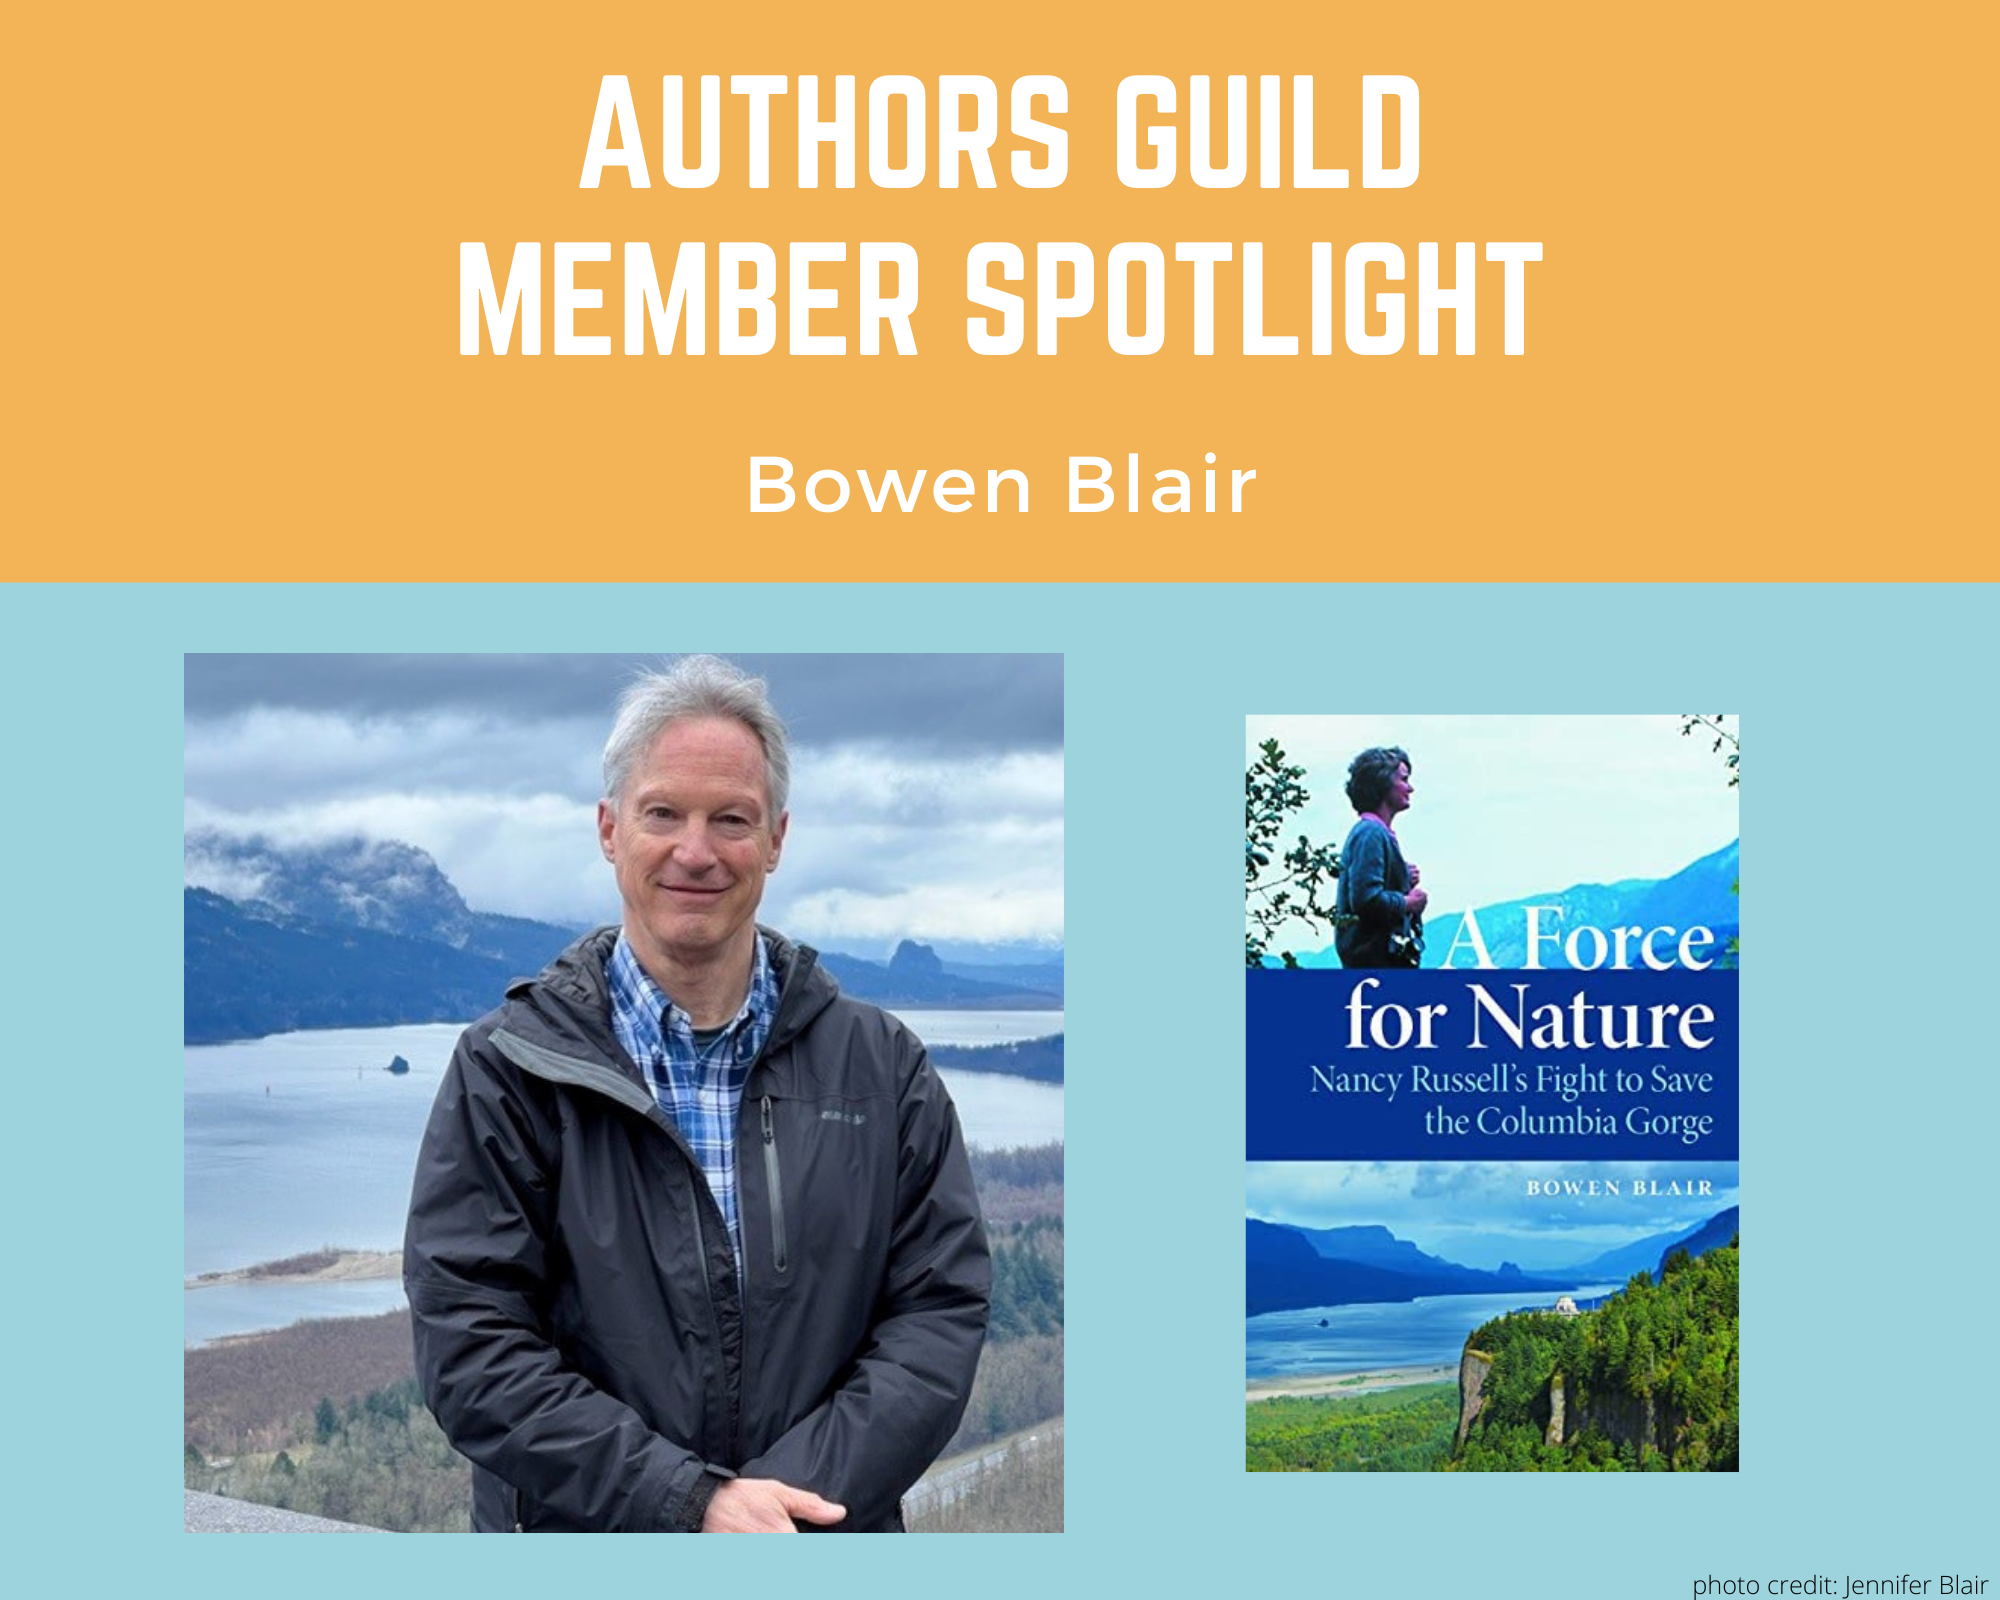 author Bowen Blair and an image of his book A Force for Nature